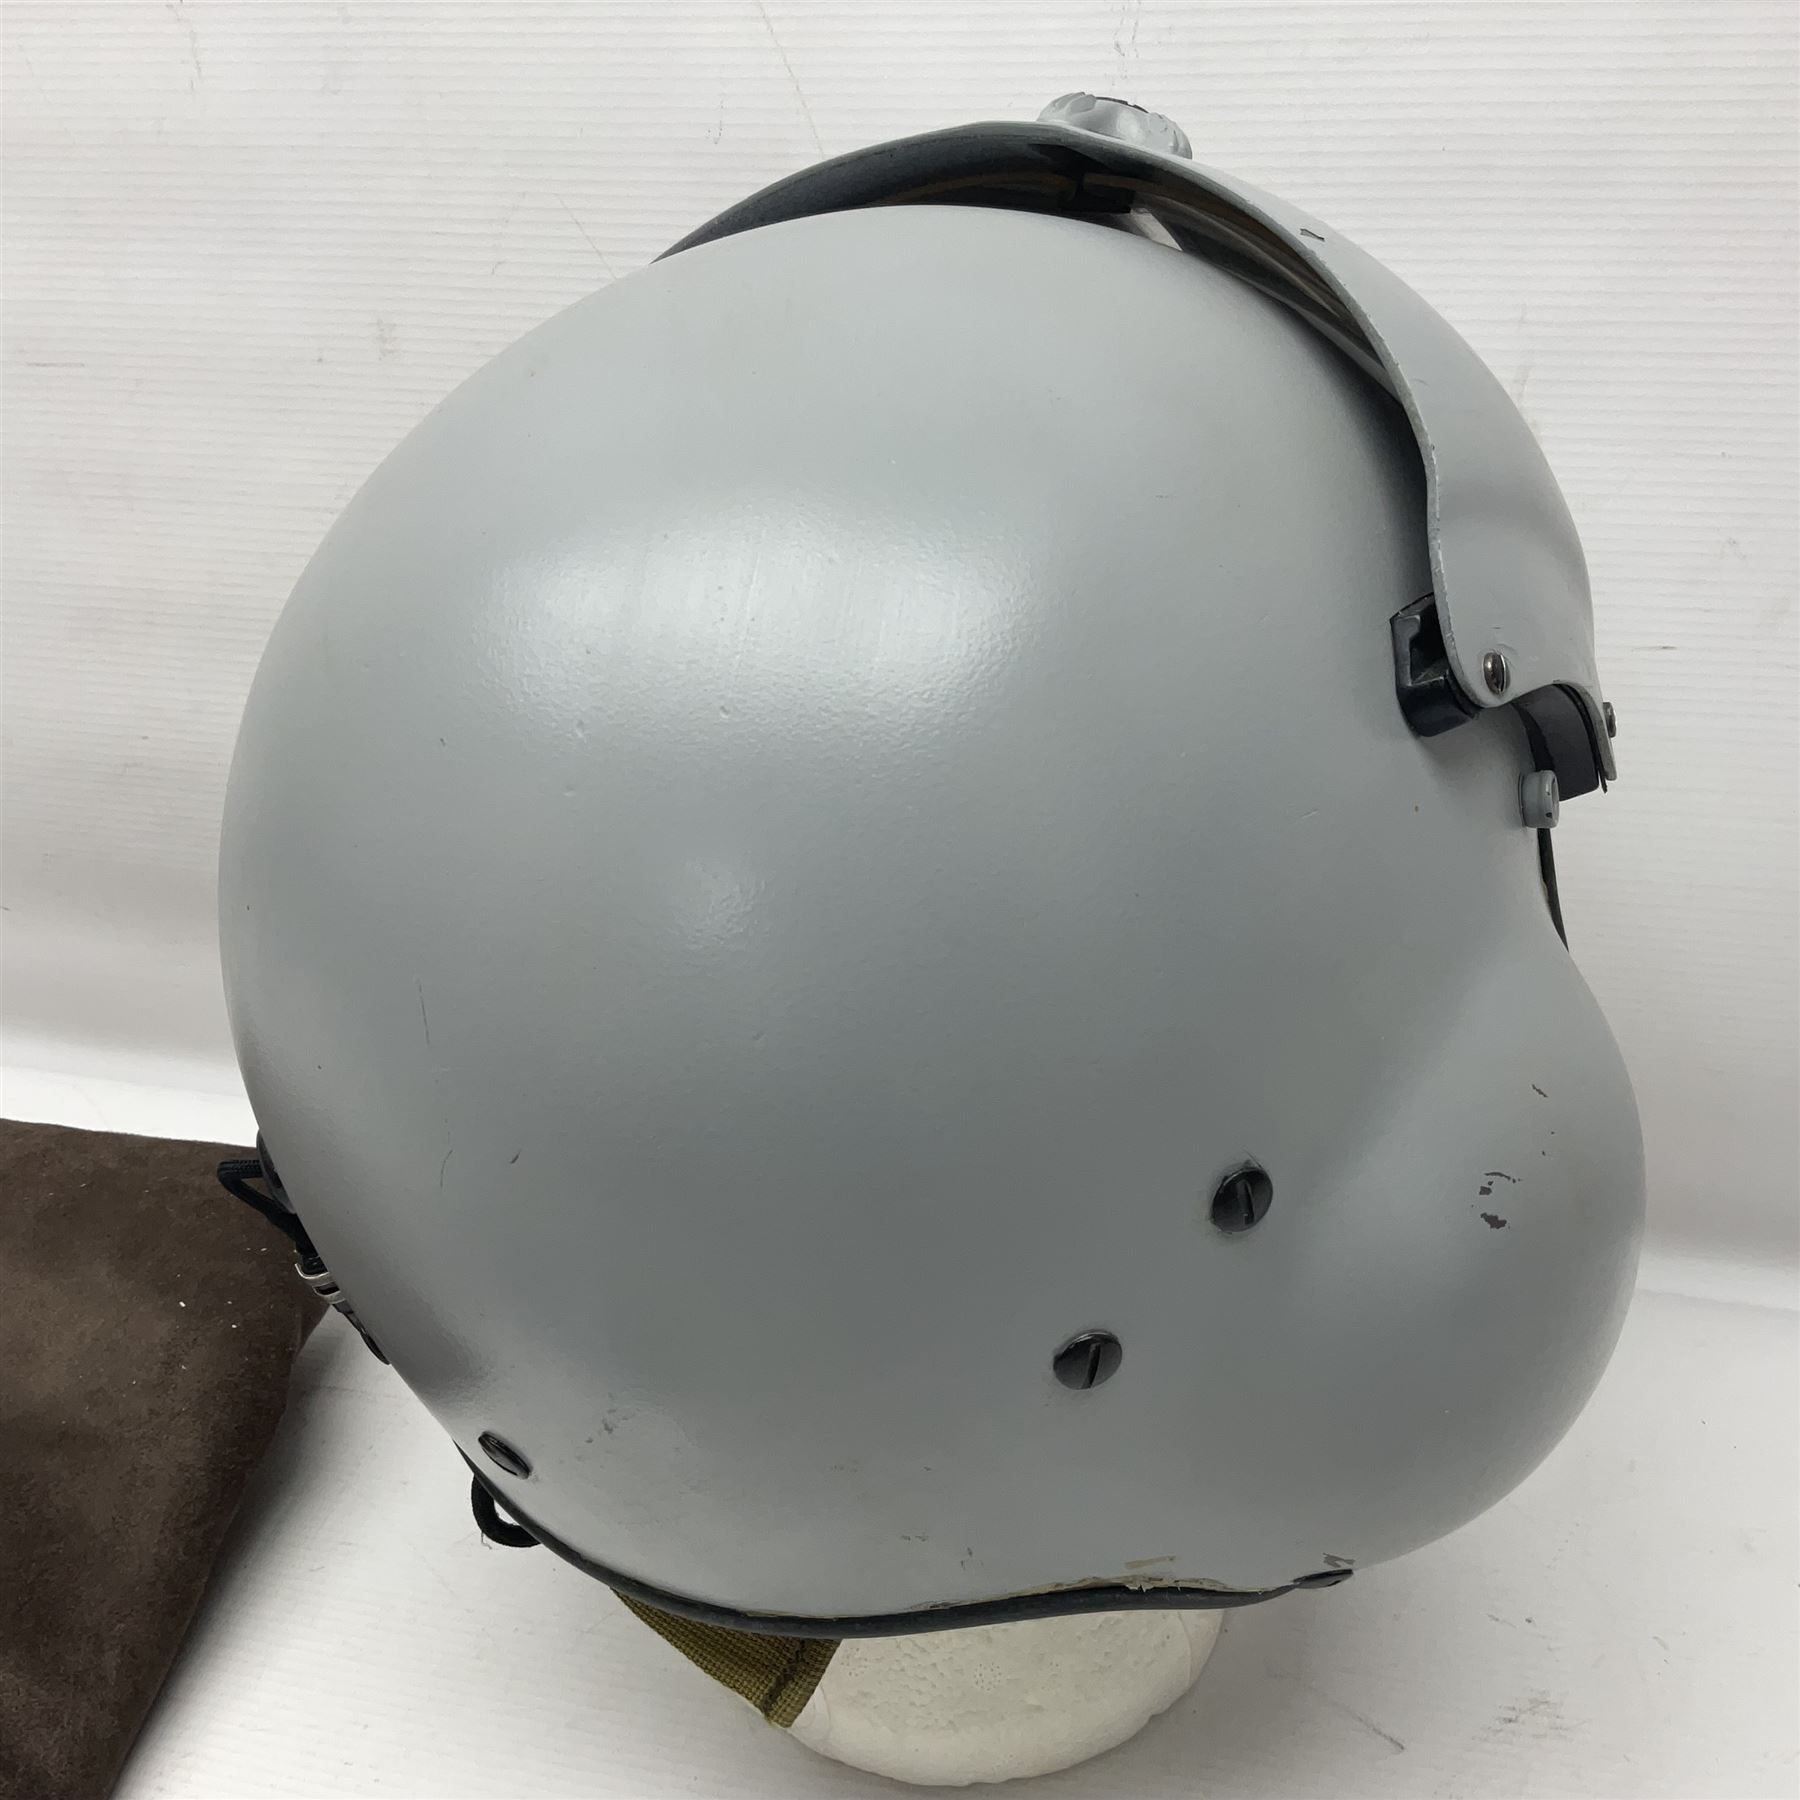 Silver grey SPH-4B Flight Helmet as used by helicopter pilots in the USAF and US Army in the 1990s; - Image 7 of 20